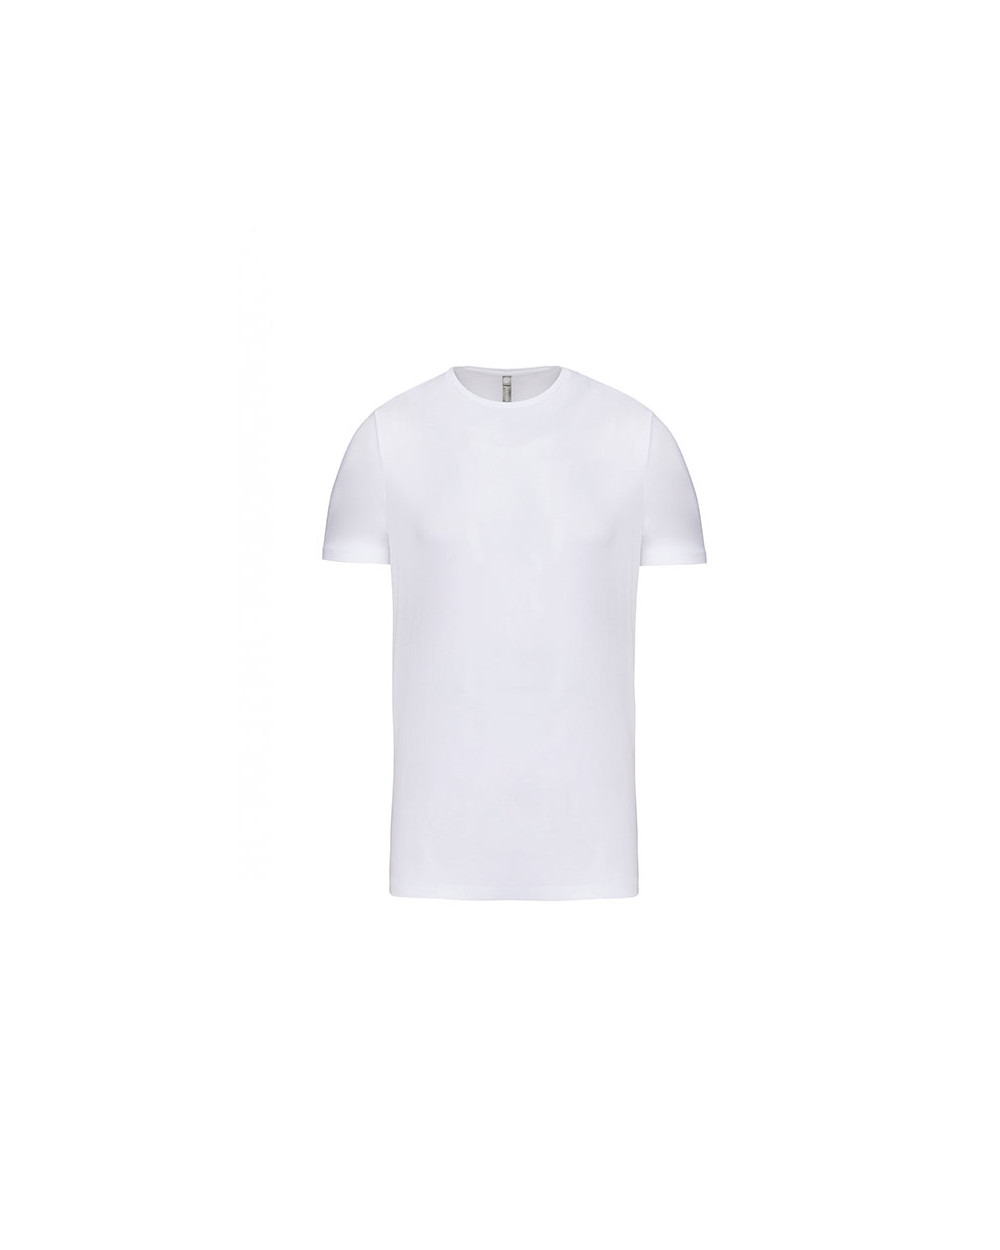 T SHIRT COL ROND MANCHES COURTES HOMME 160GR REF.K3012